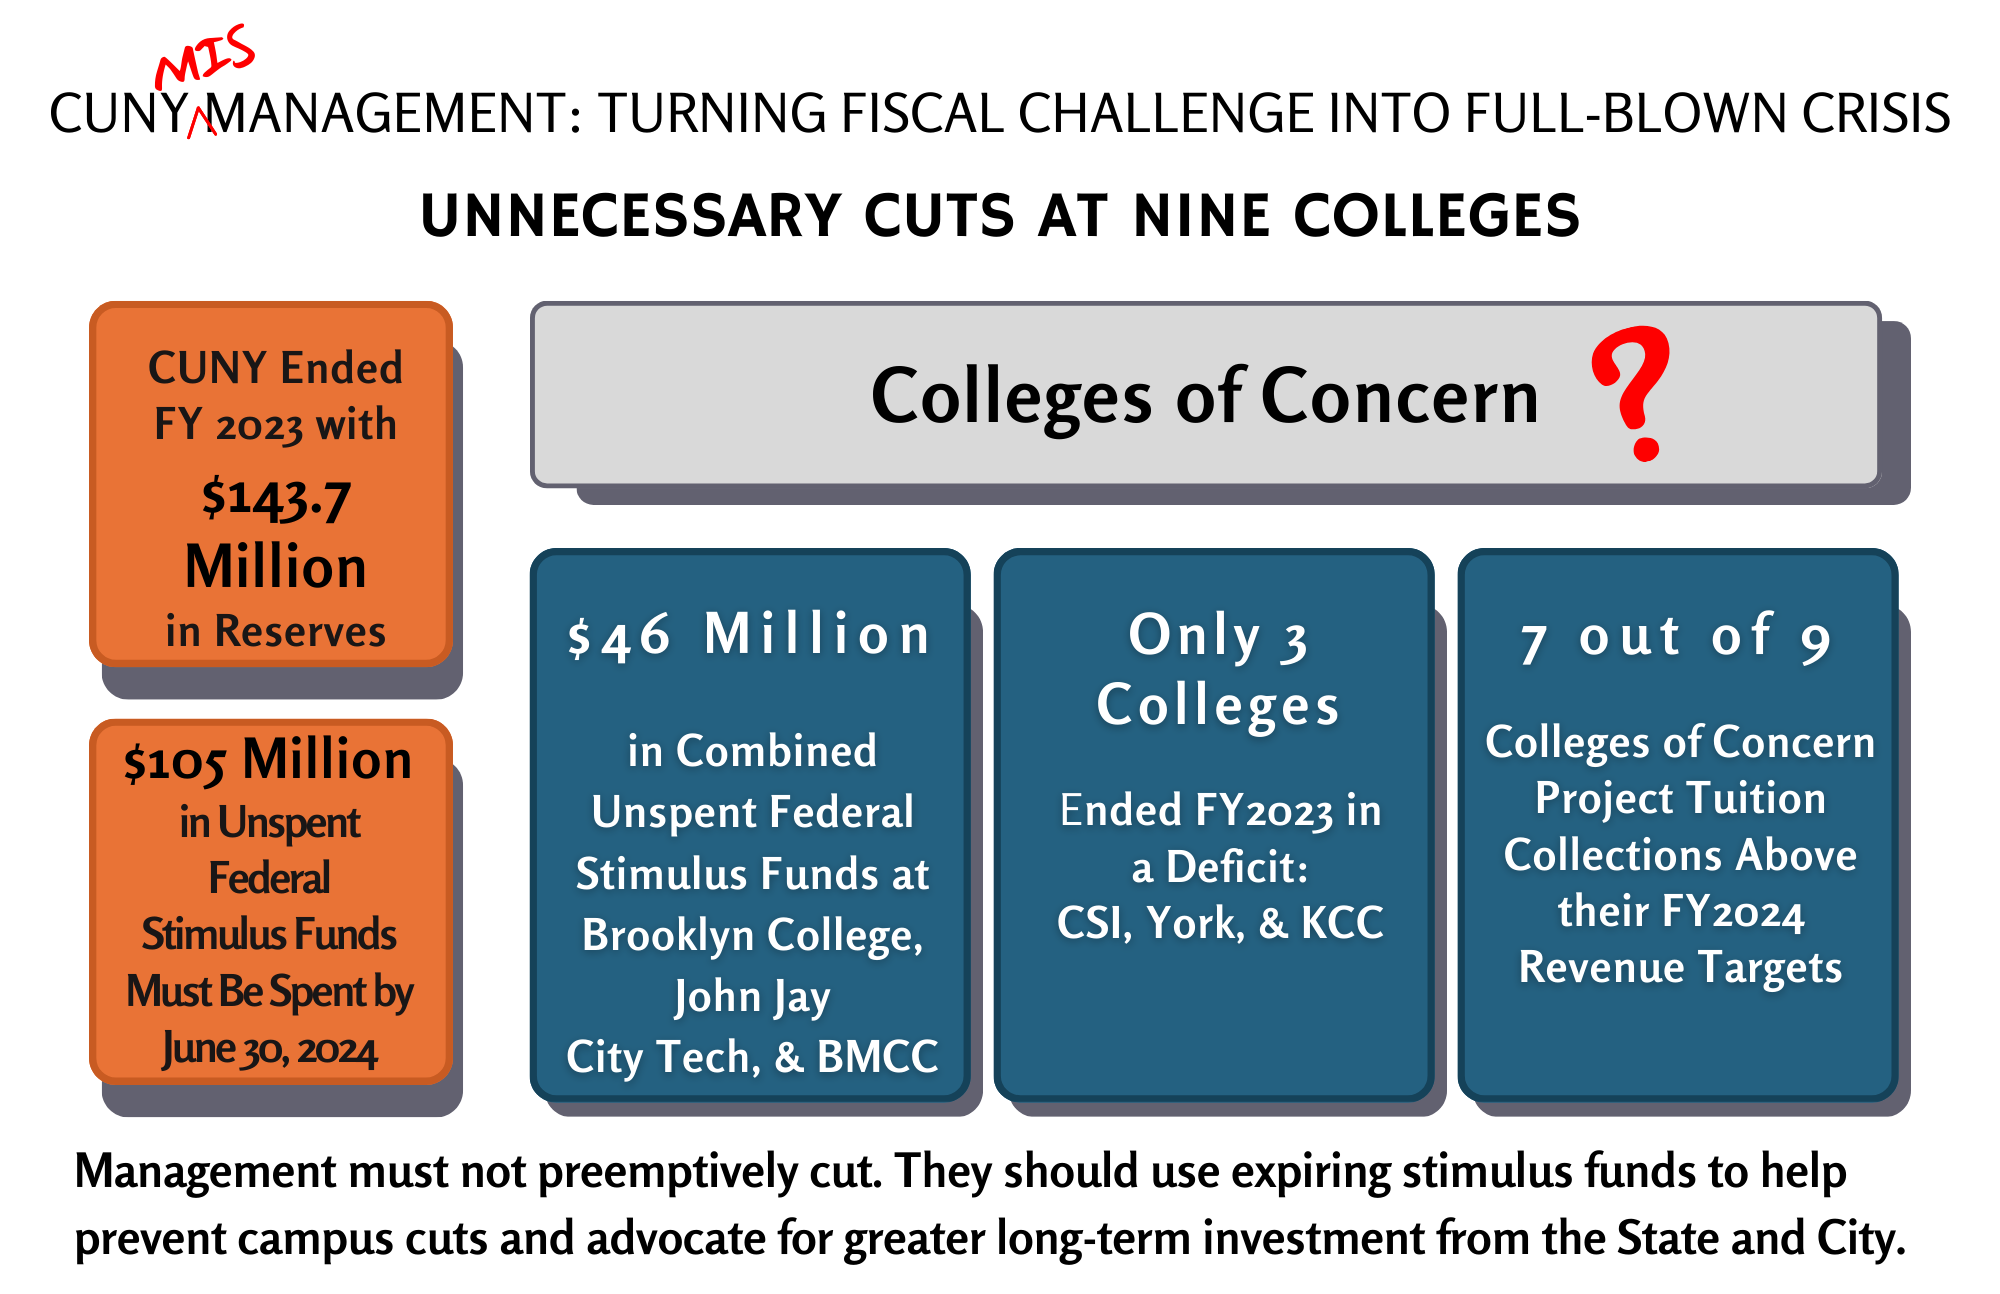 Management must not preemptively cut. They should use expiring stimulus funds to help prevent campus cuts and advocate for greater long-term investment from the State and City.